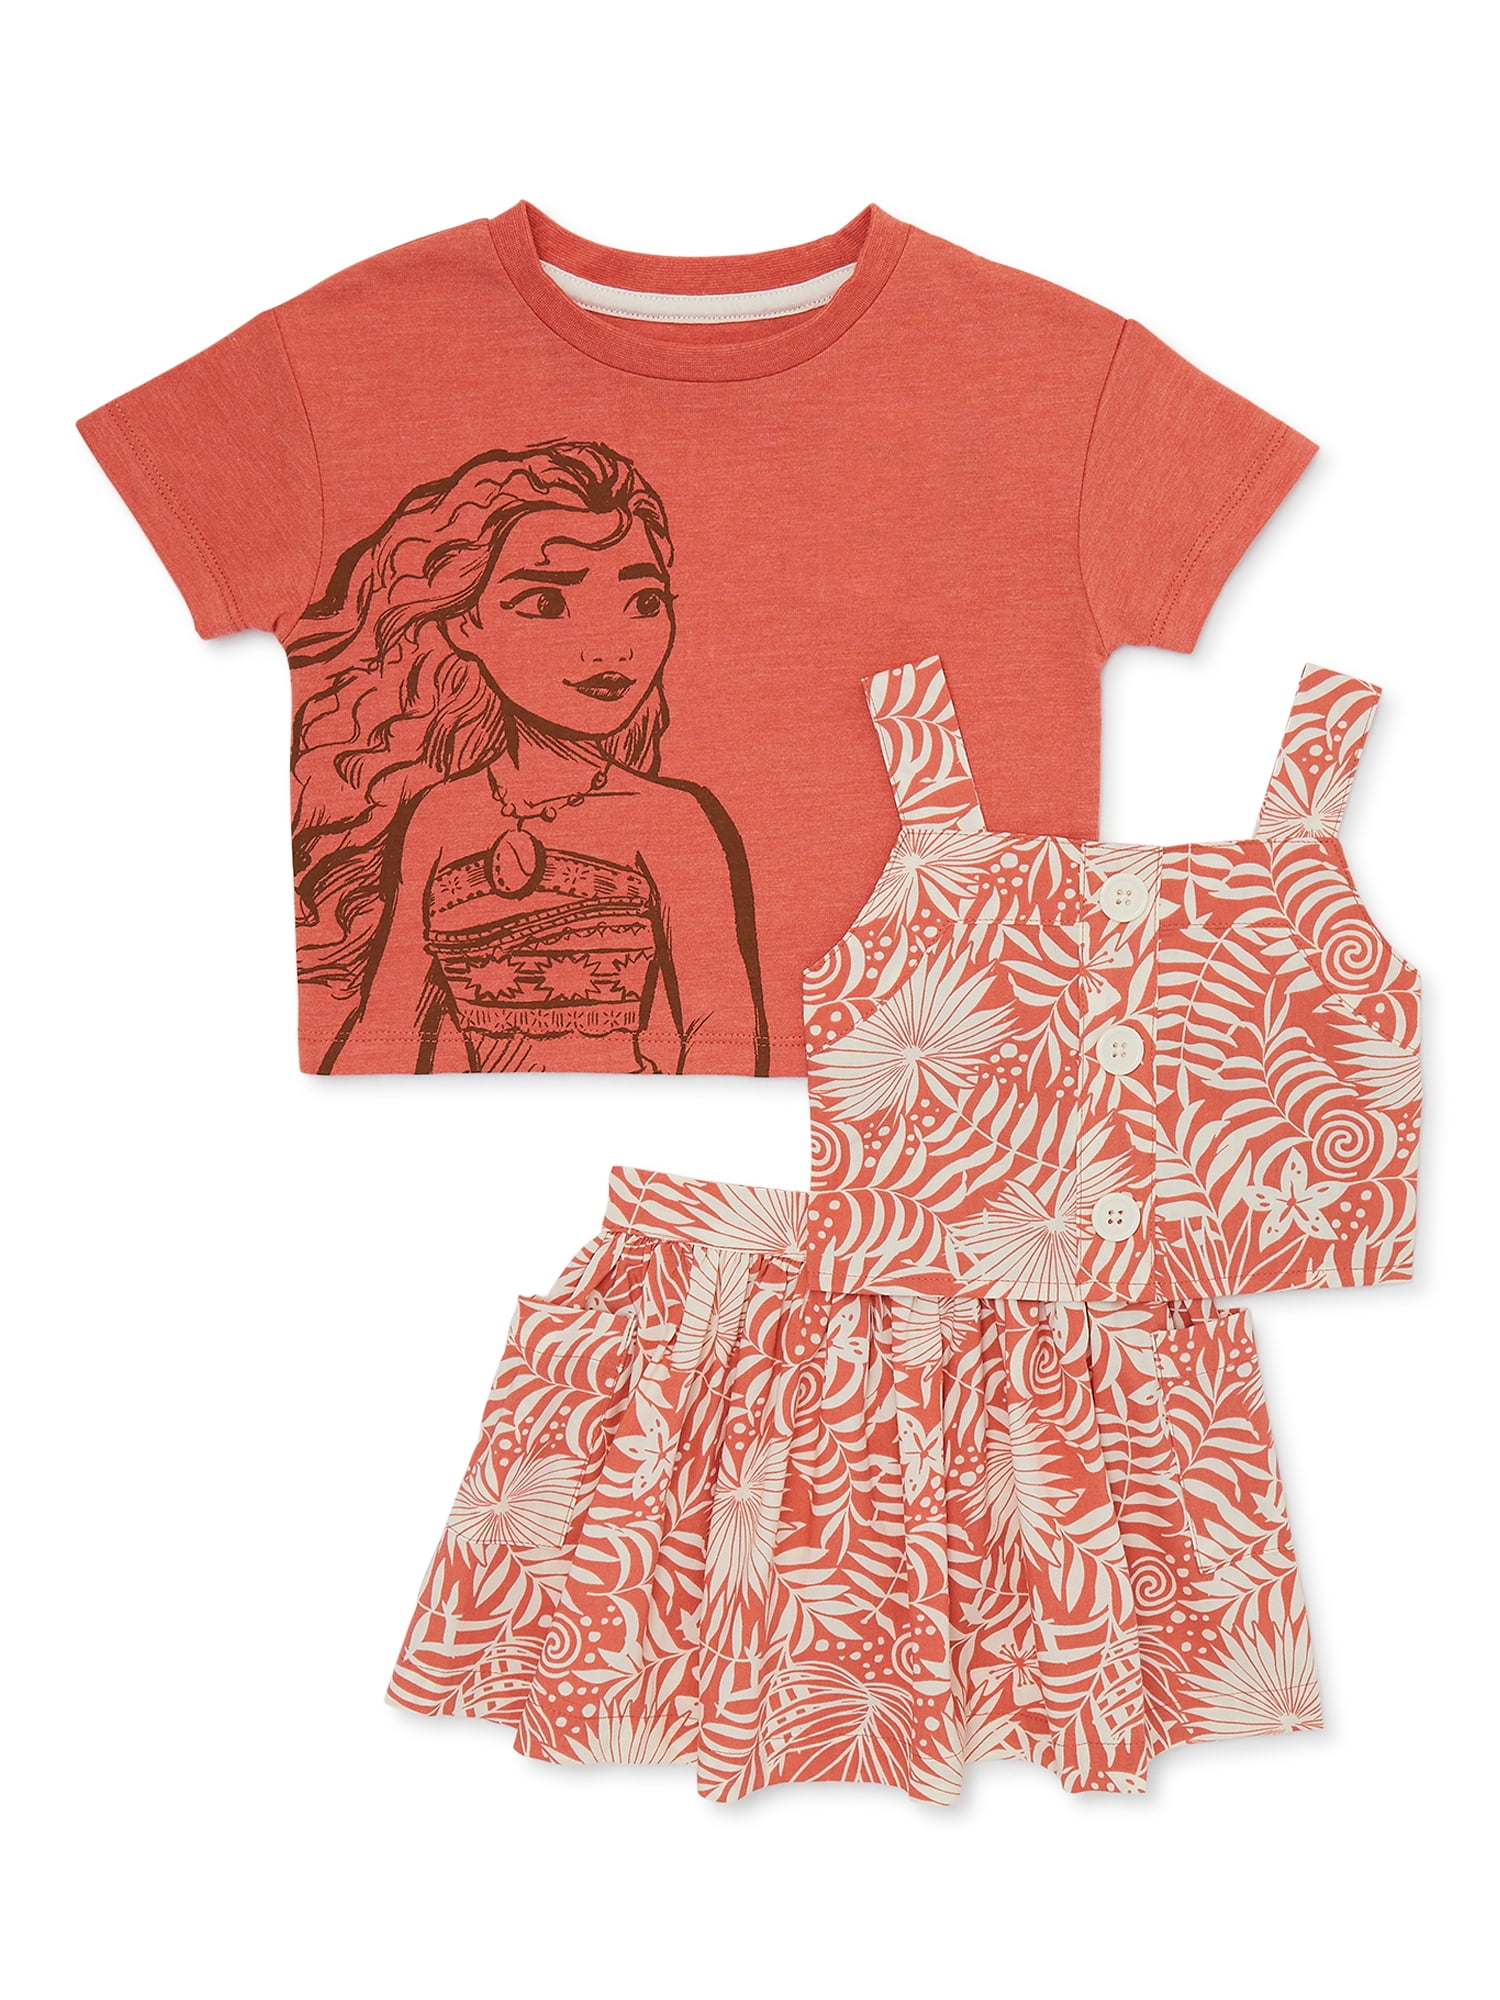 Moana Baby and Toddler Girls Tee, Tank and Skirt Set, 3-Piece, Sizes 12M-5T